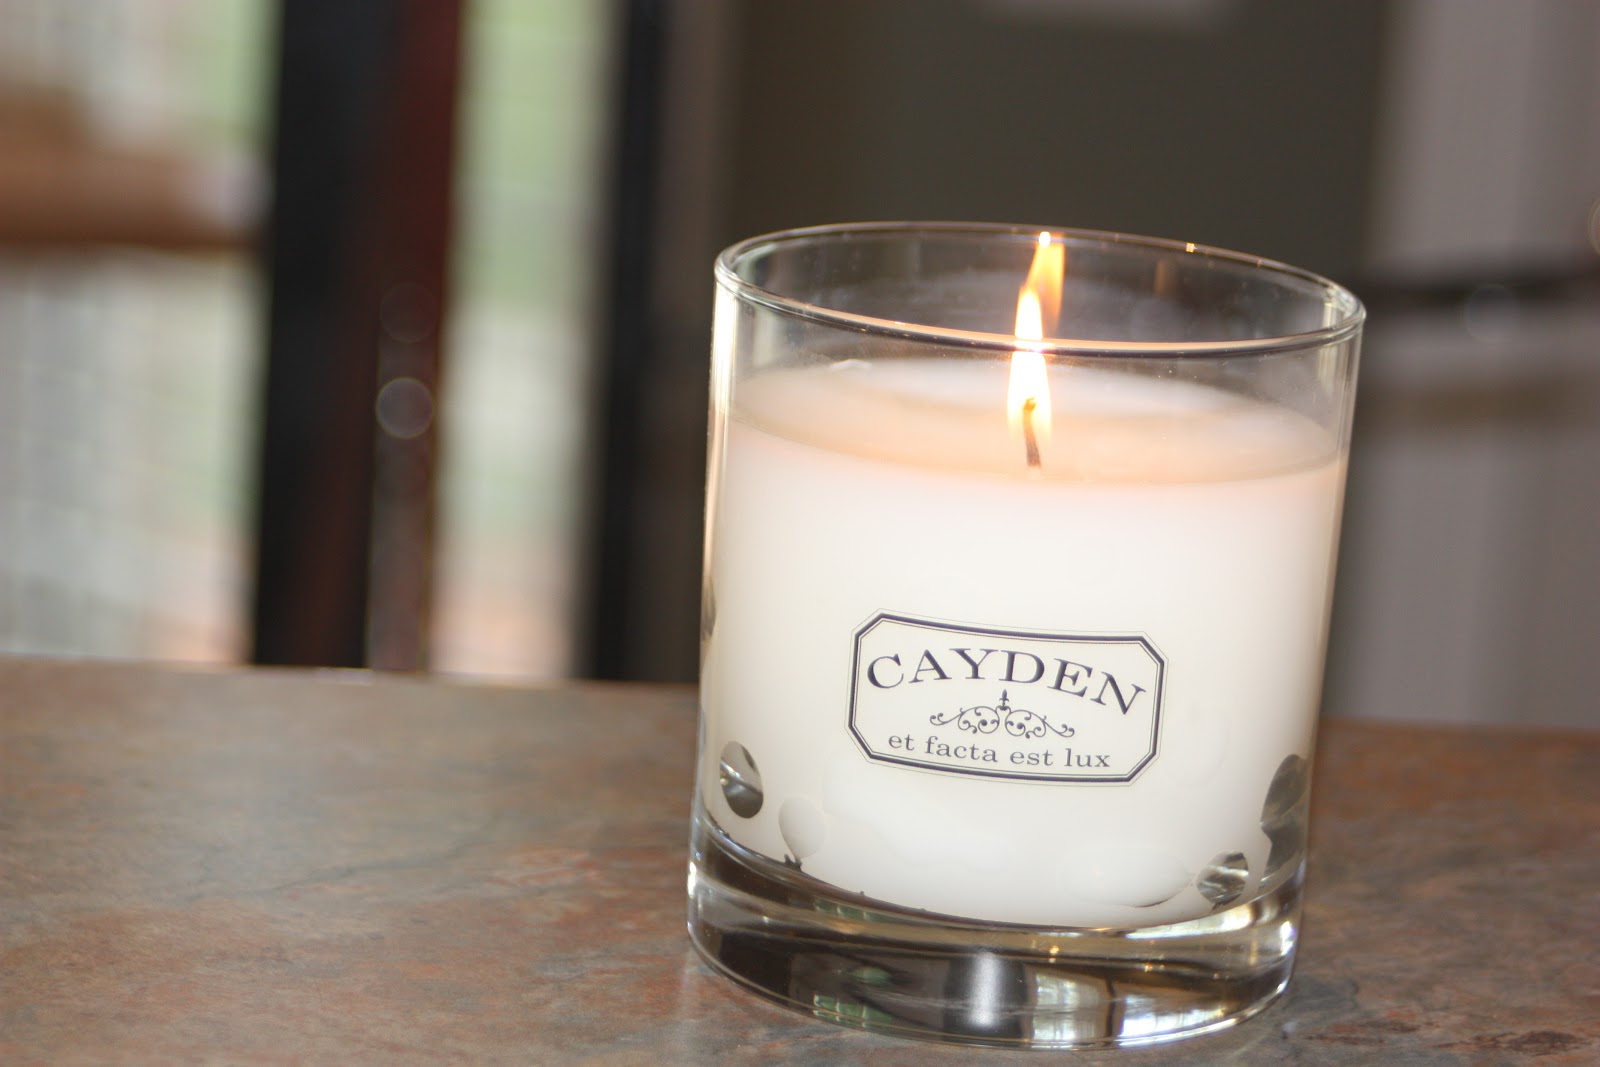 Quality Mom Reviews: Cayden Candle Company - Review